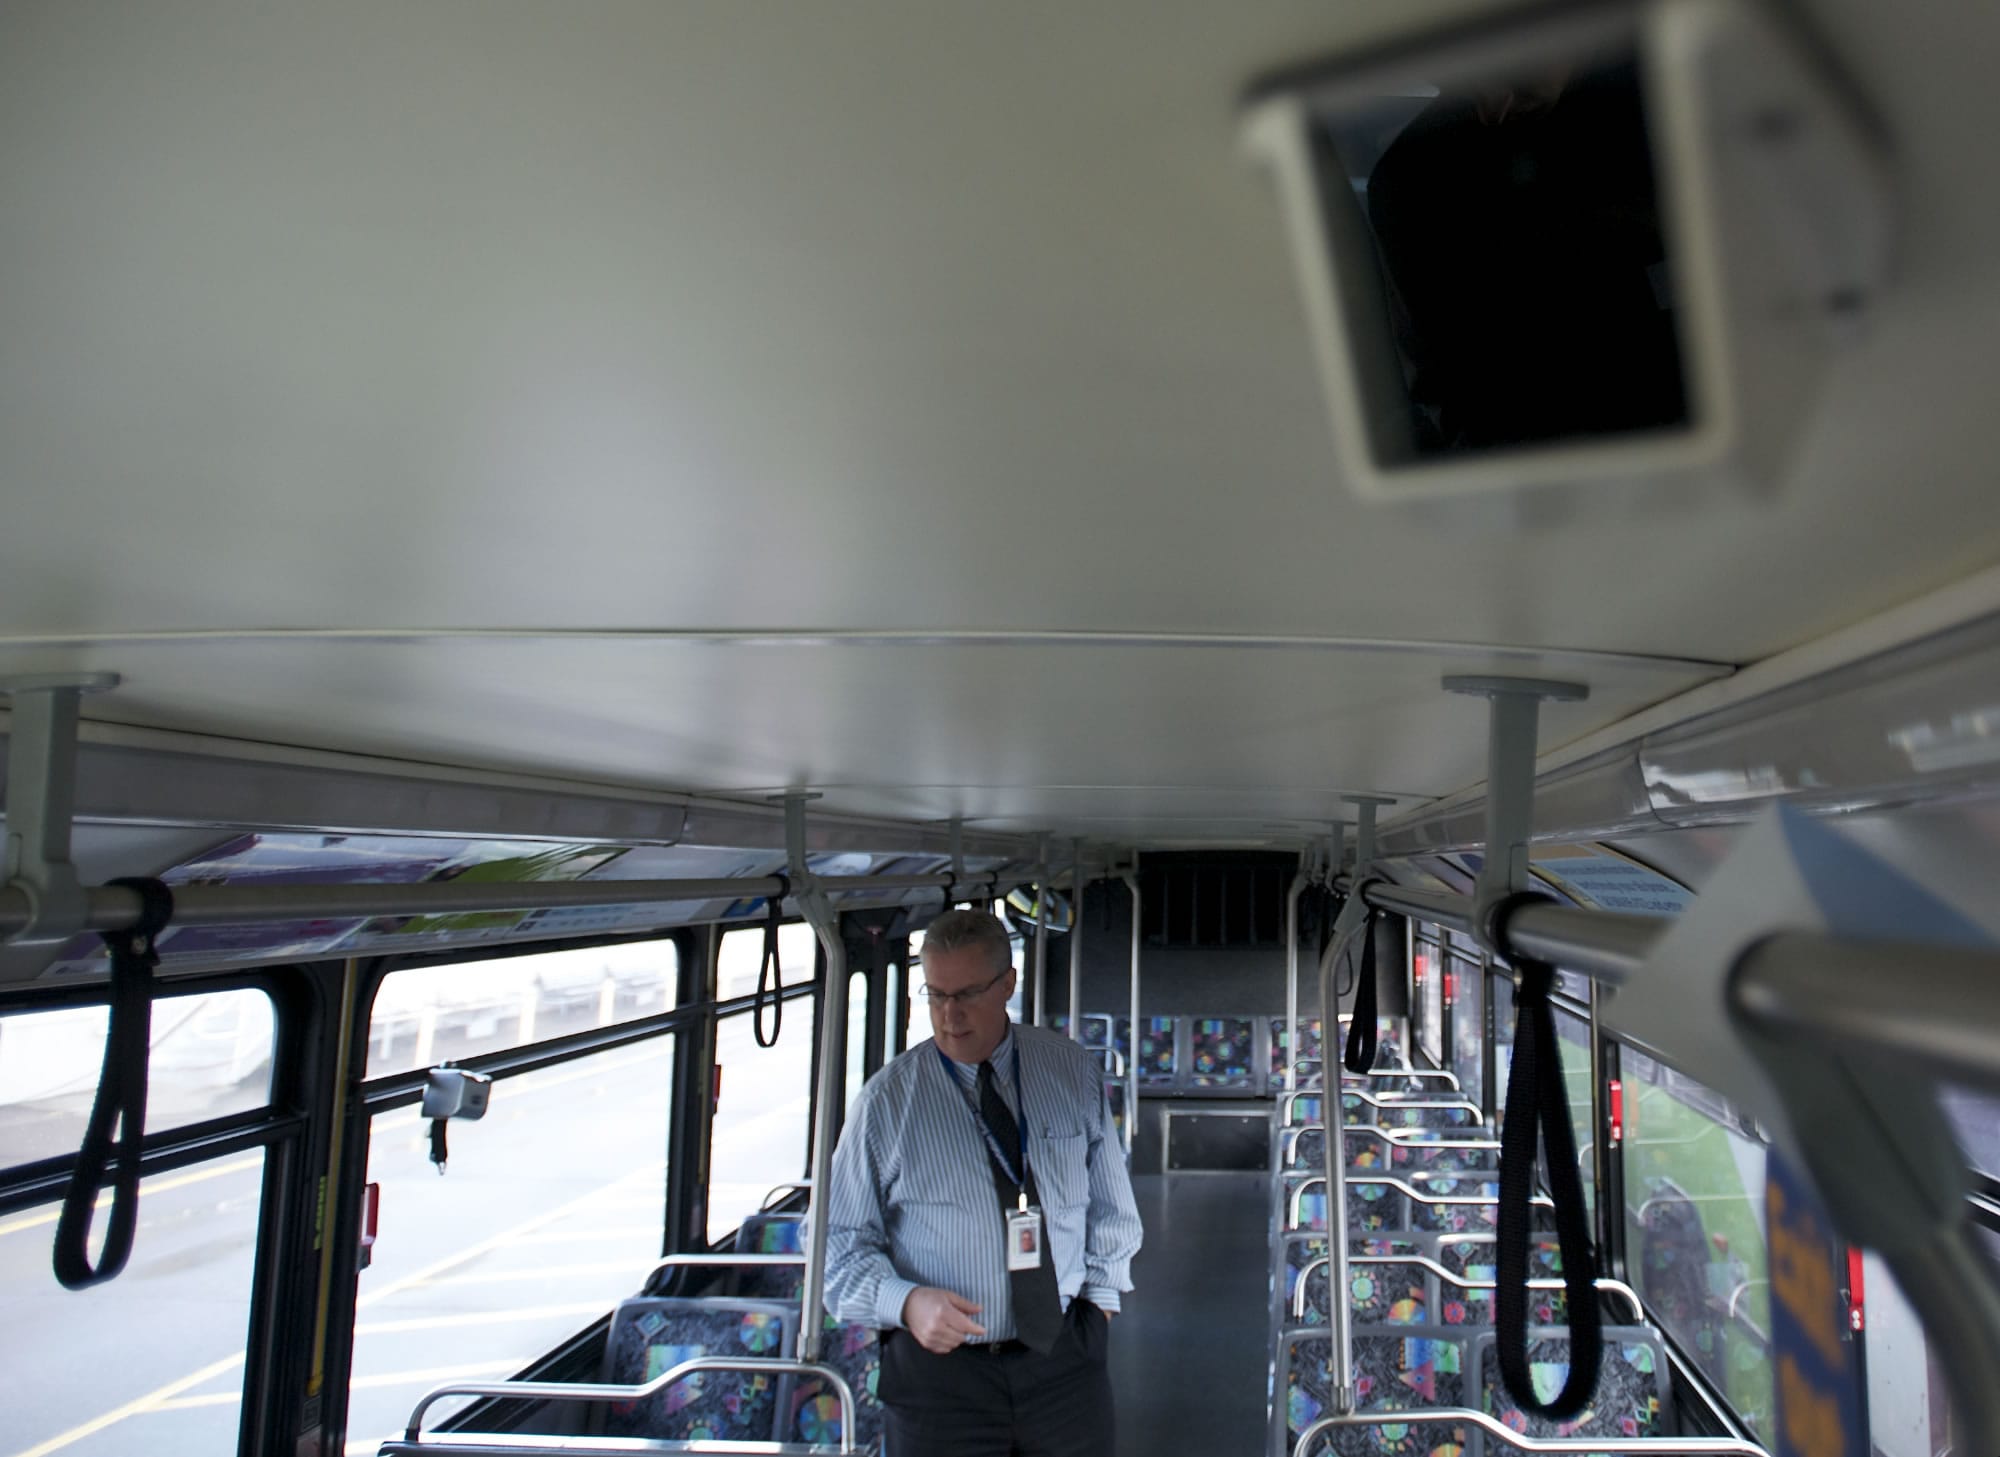 C-Tran uses video from its on-board bus cameras for a variety of reasons, mostly mundane, according to field operations manager Bob Medcraft.